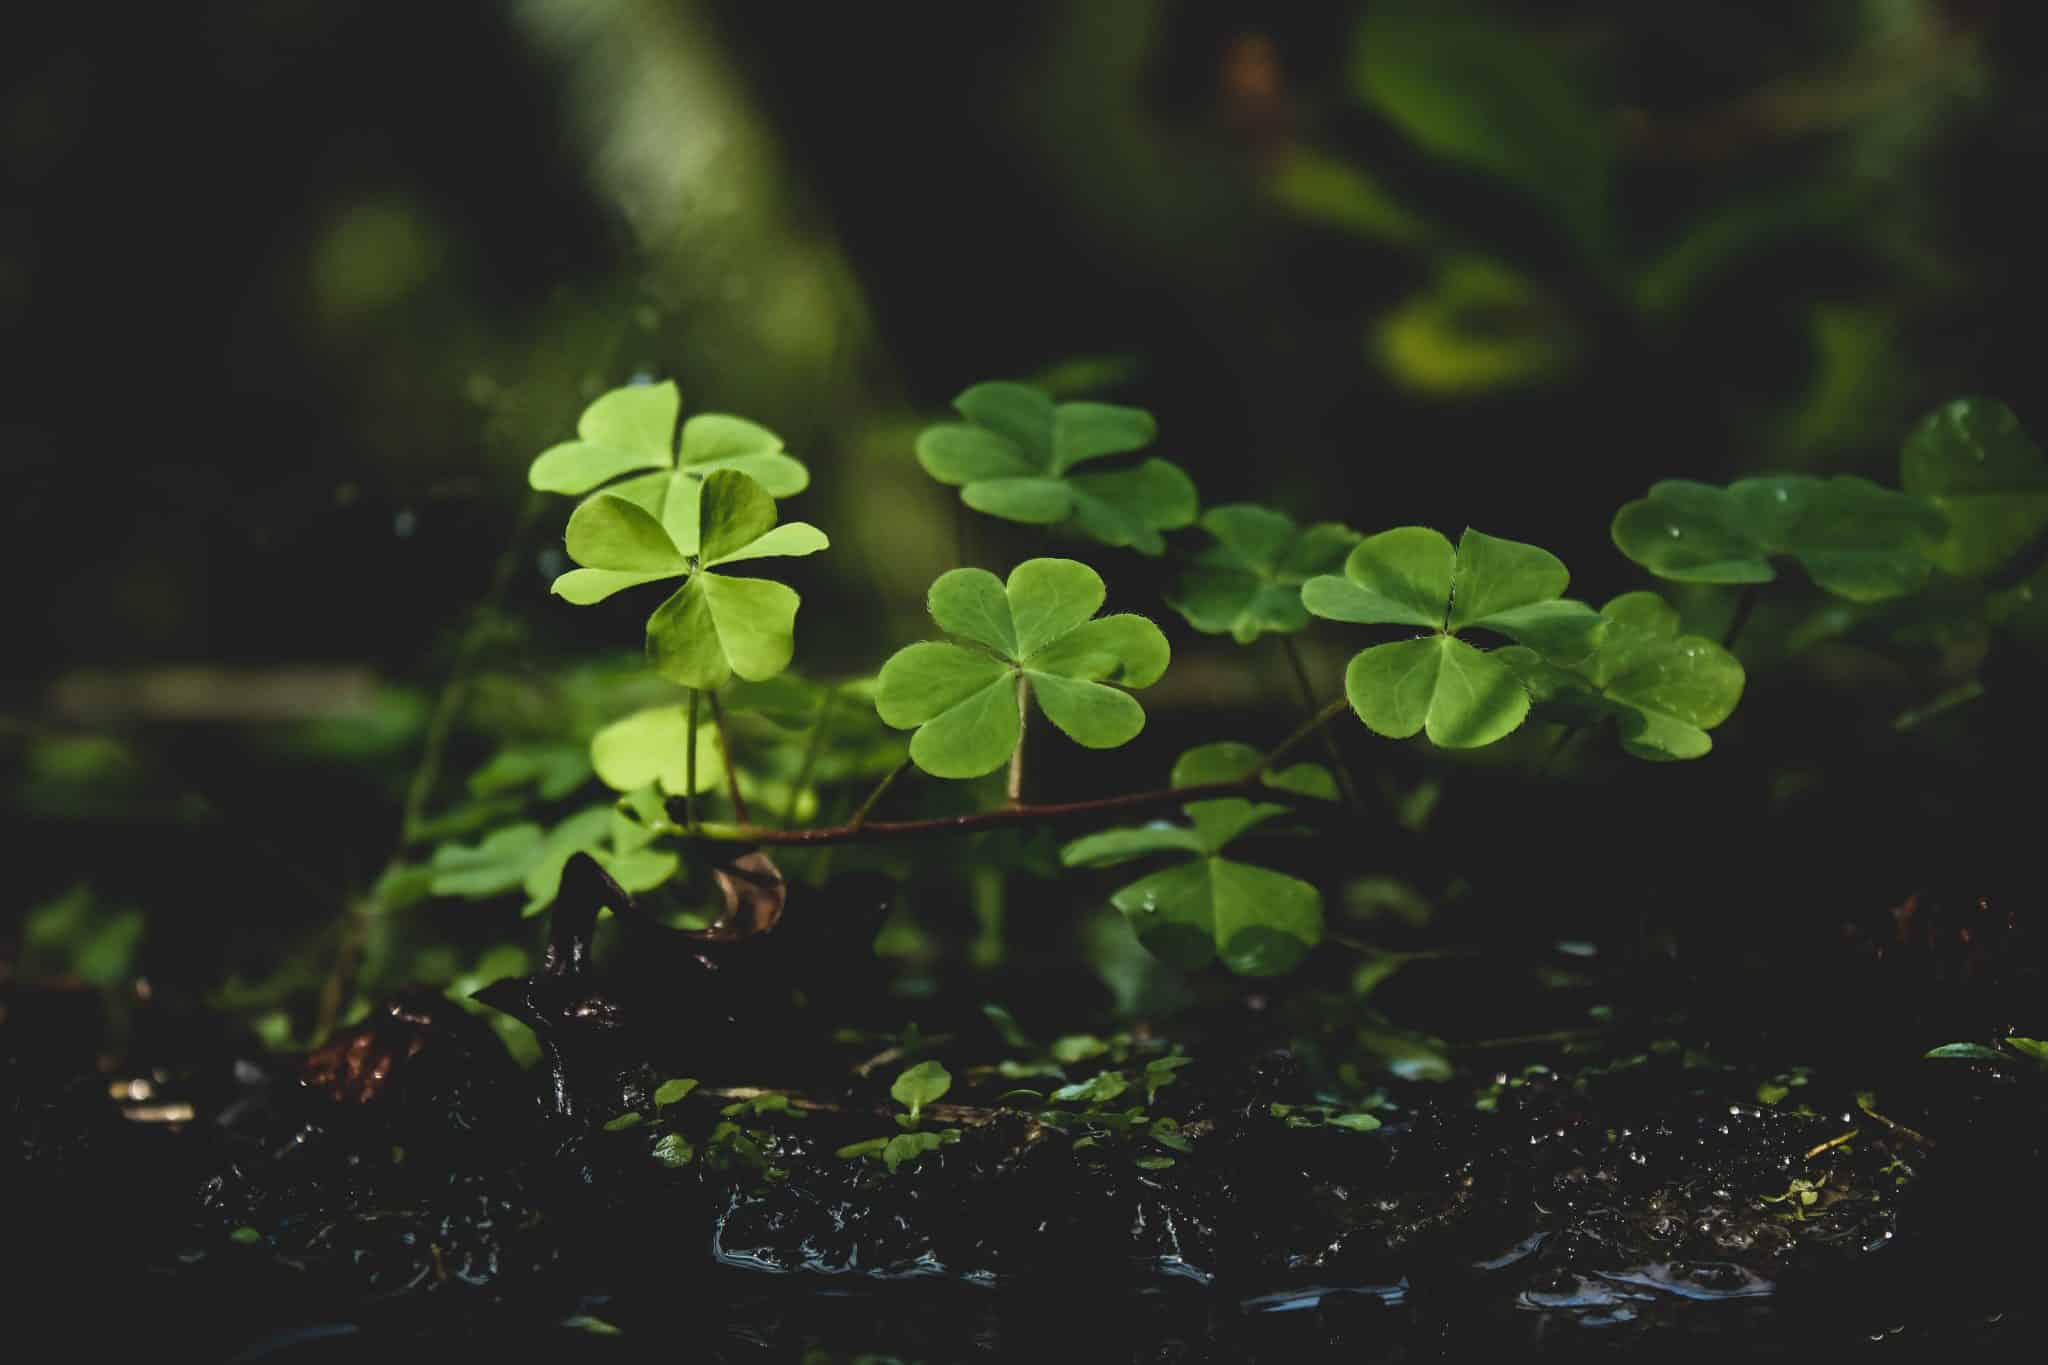 Stay sober this St. Patrick's Day with the help of New Leaf Recovery, offering alcohol addiction treatments and therapies.